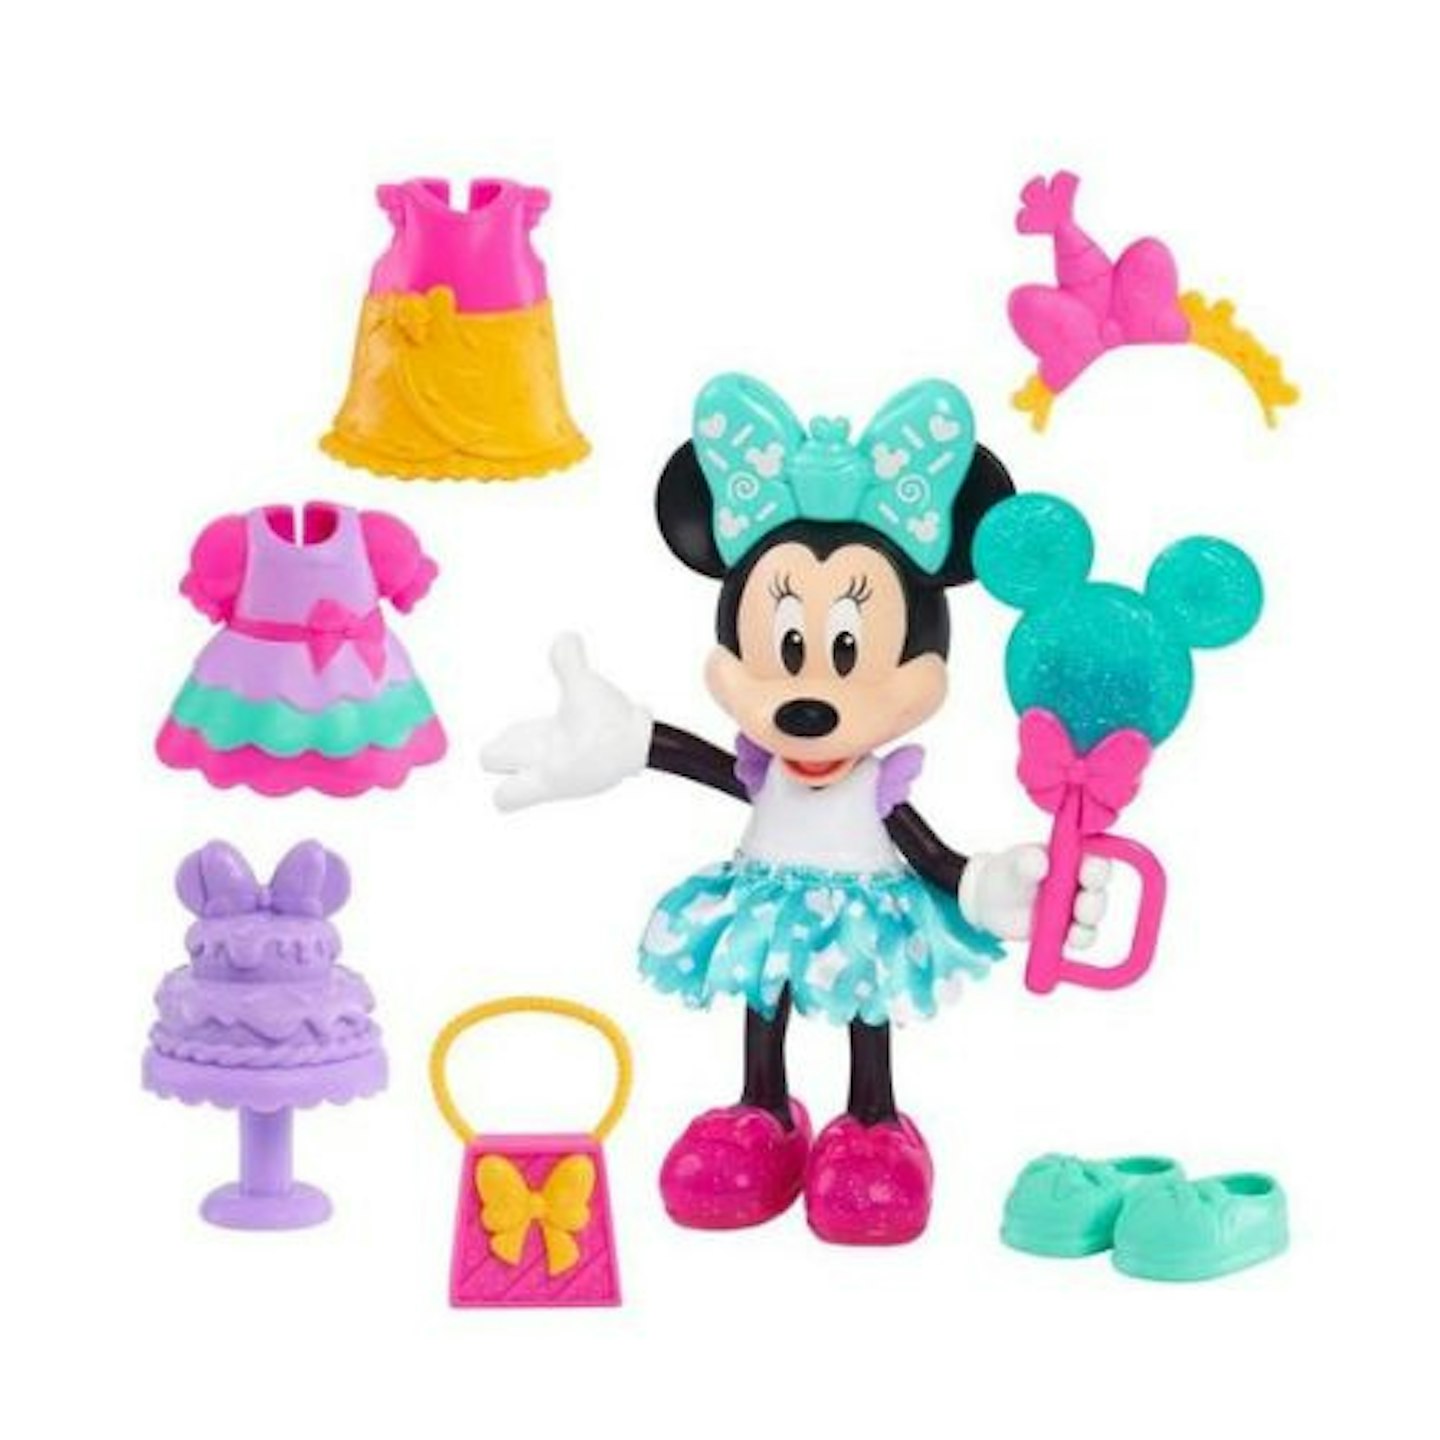 Best Minnie Mouse toy Minnie Mouse Fabulous Fashion Doll